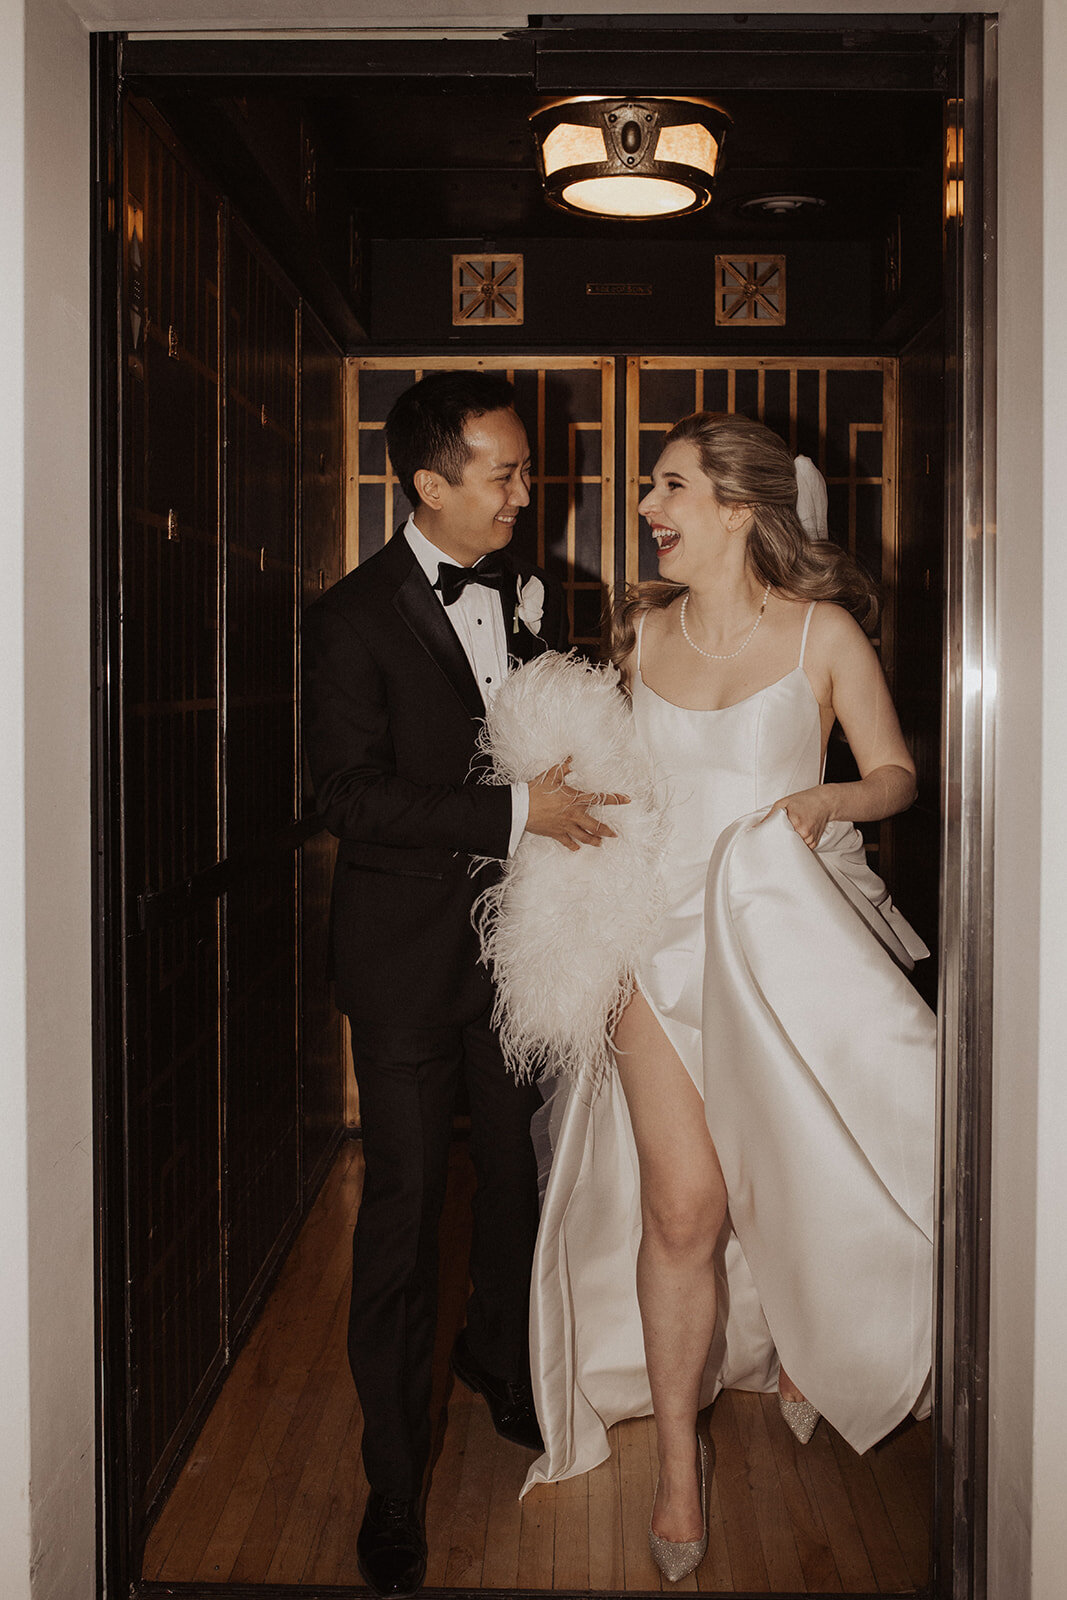 Newlyweds laughing in a vintage elevator.